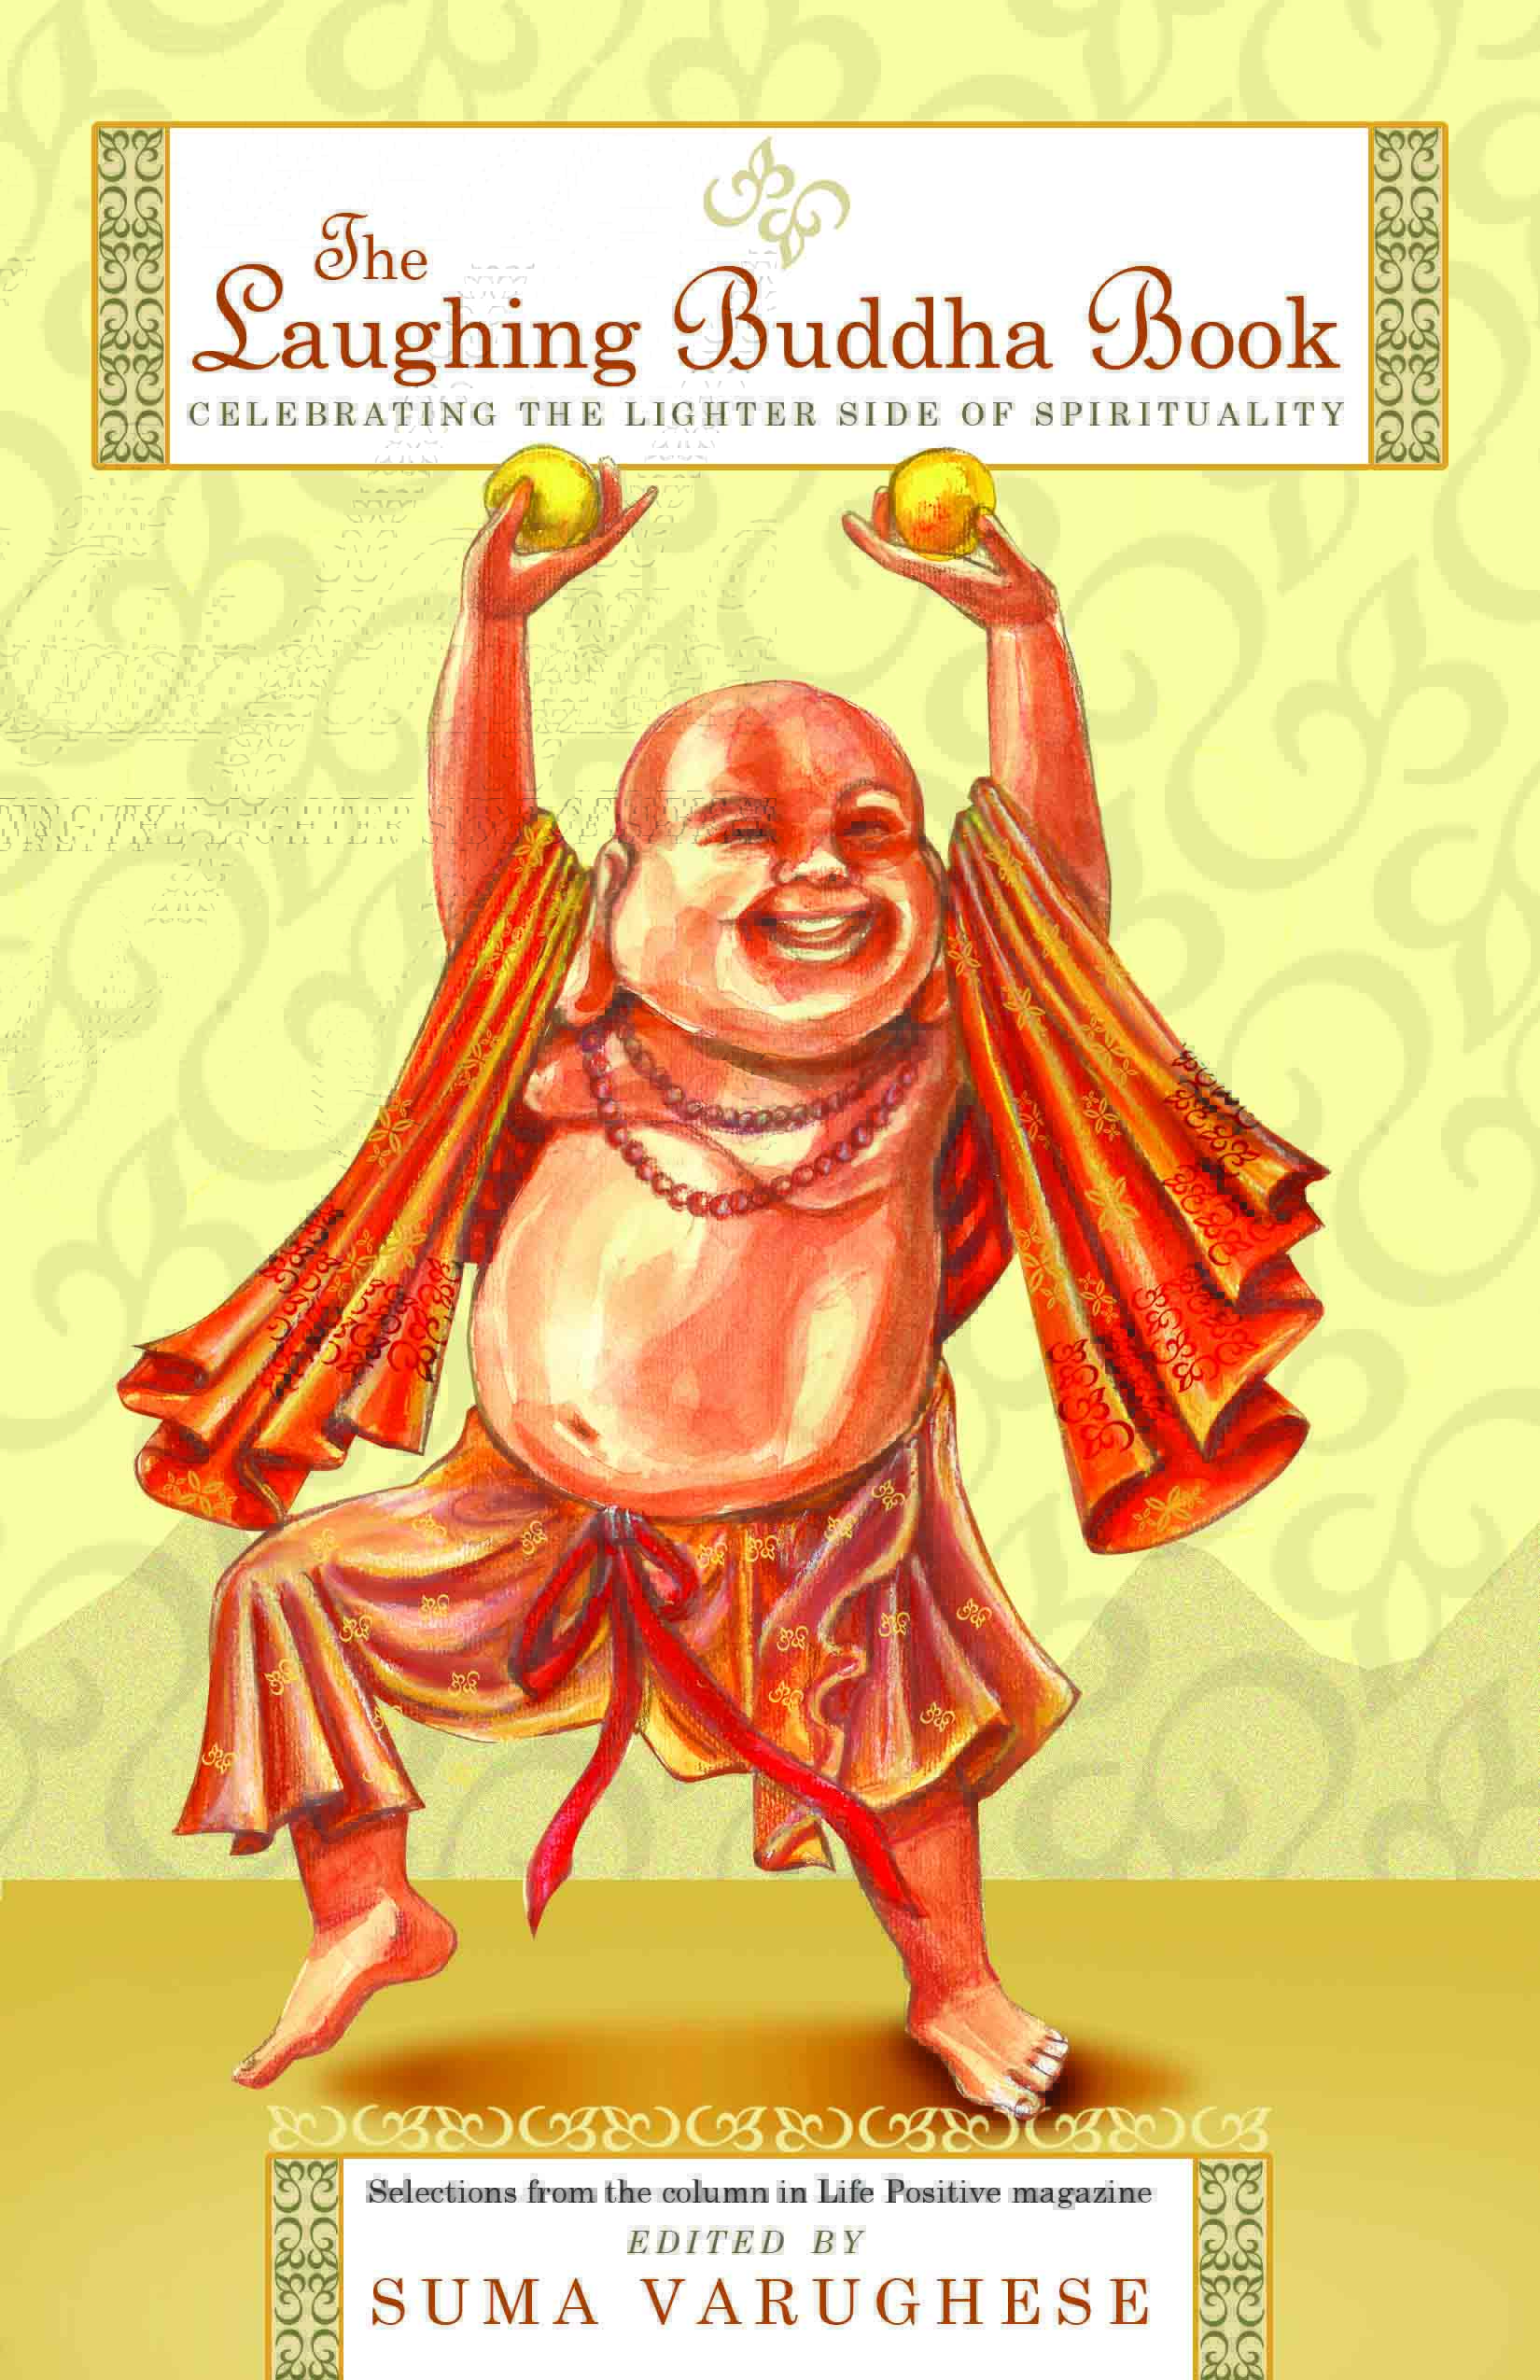 Buy The Laughing Buddha Book Online by Suma Varughese